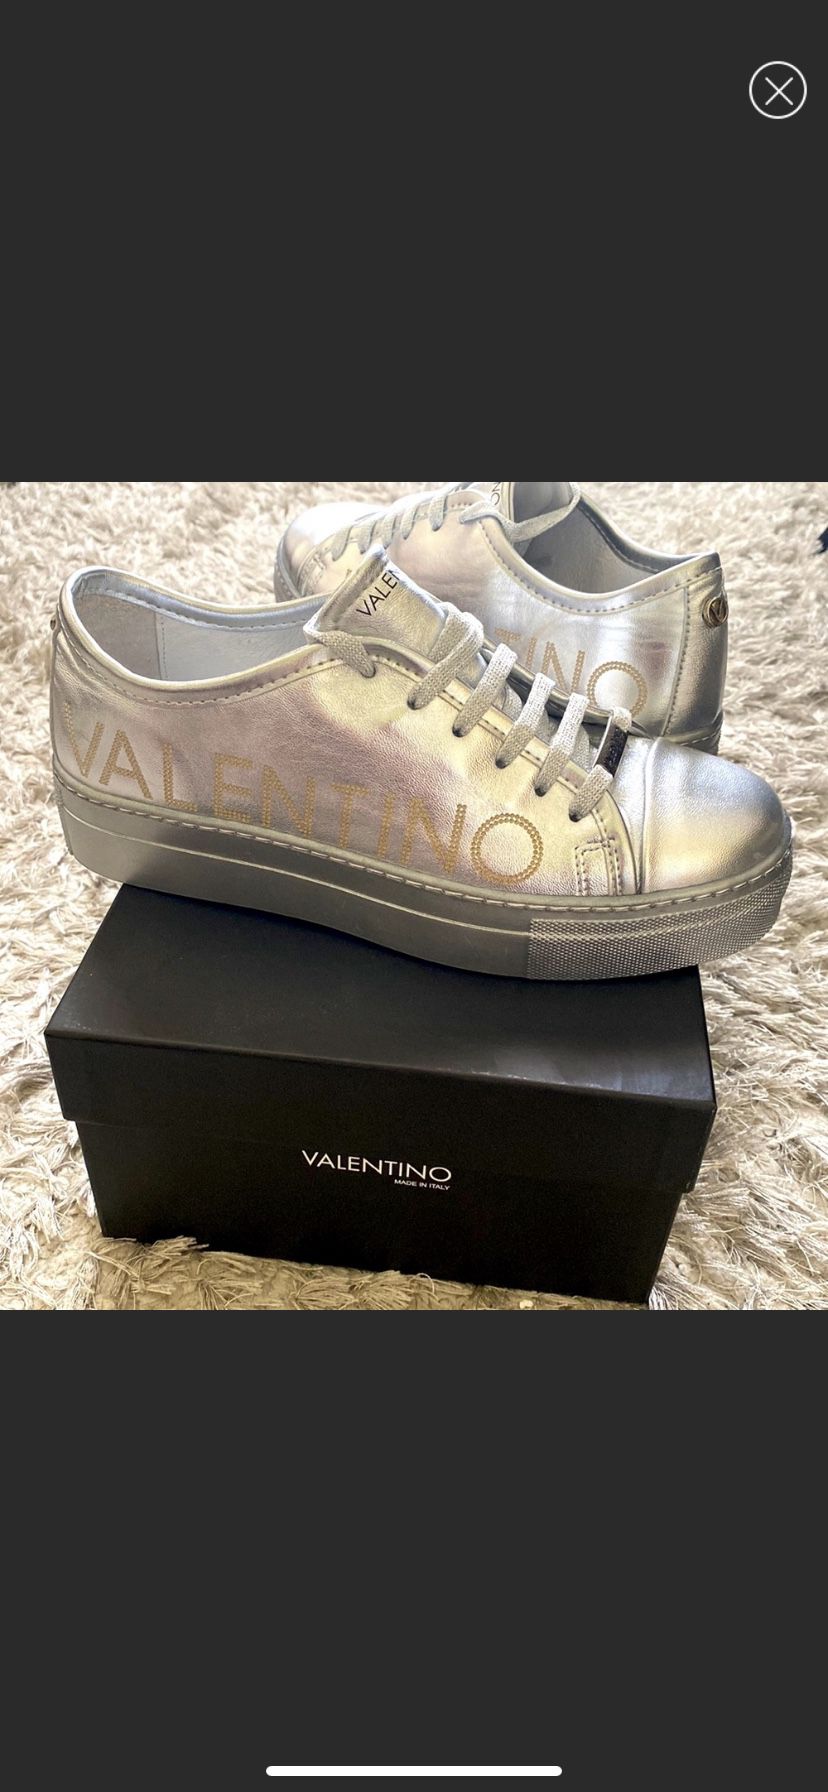 Valentino Silver Shoes New